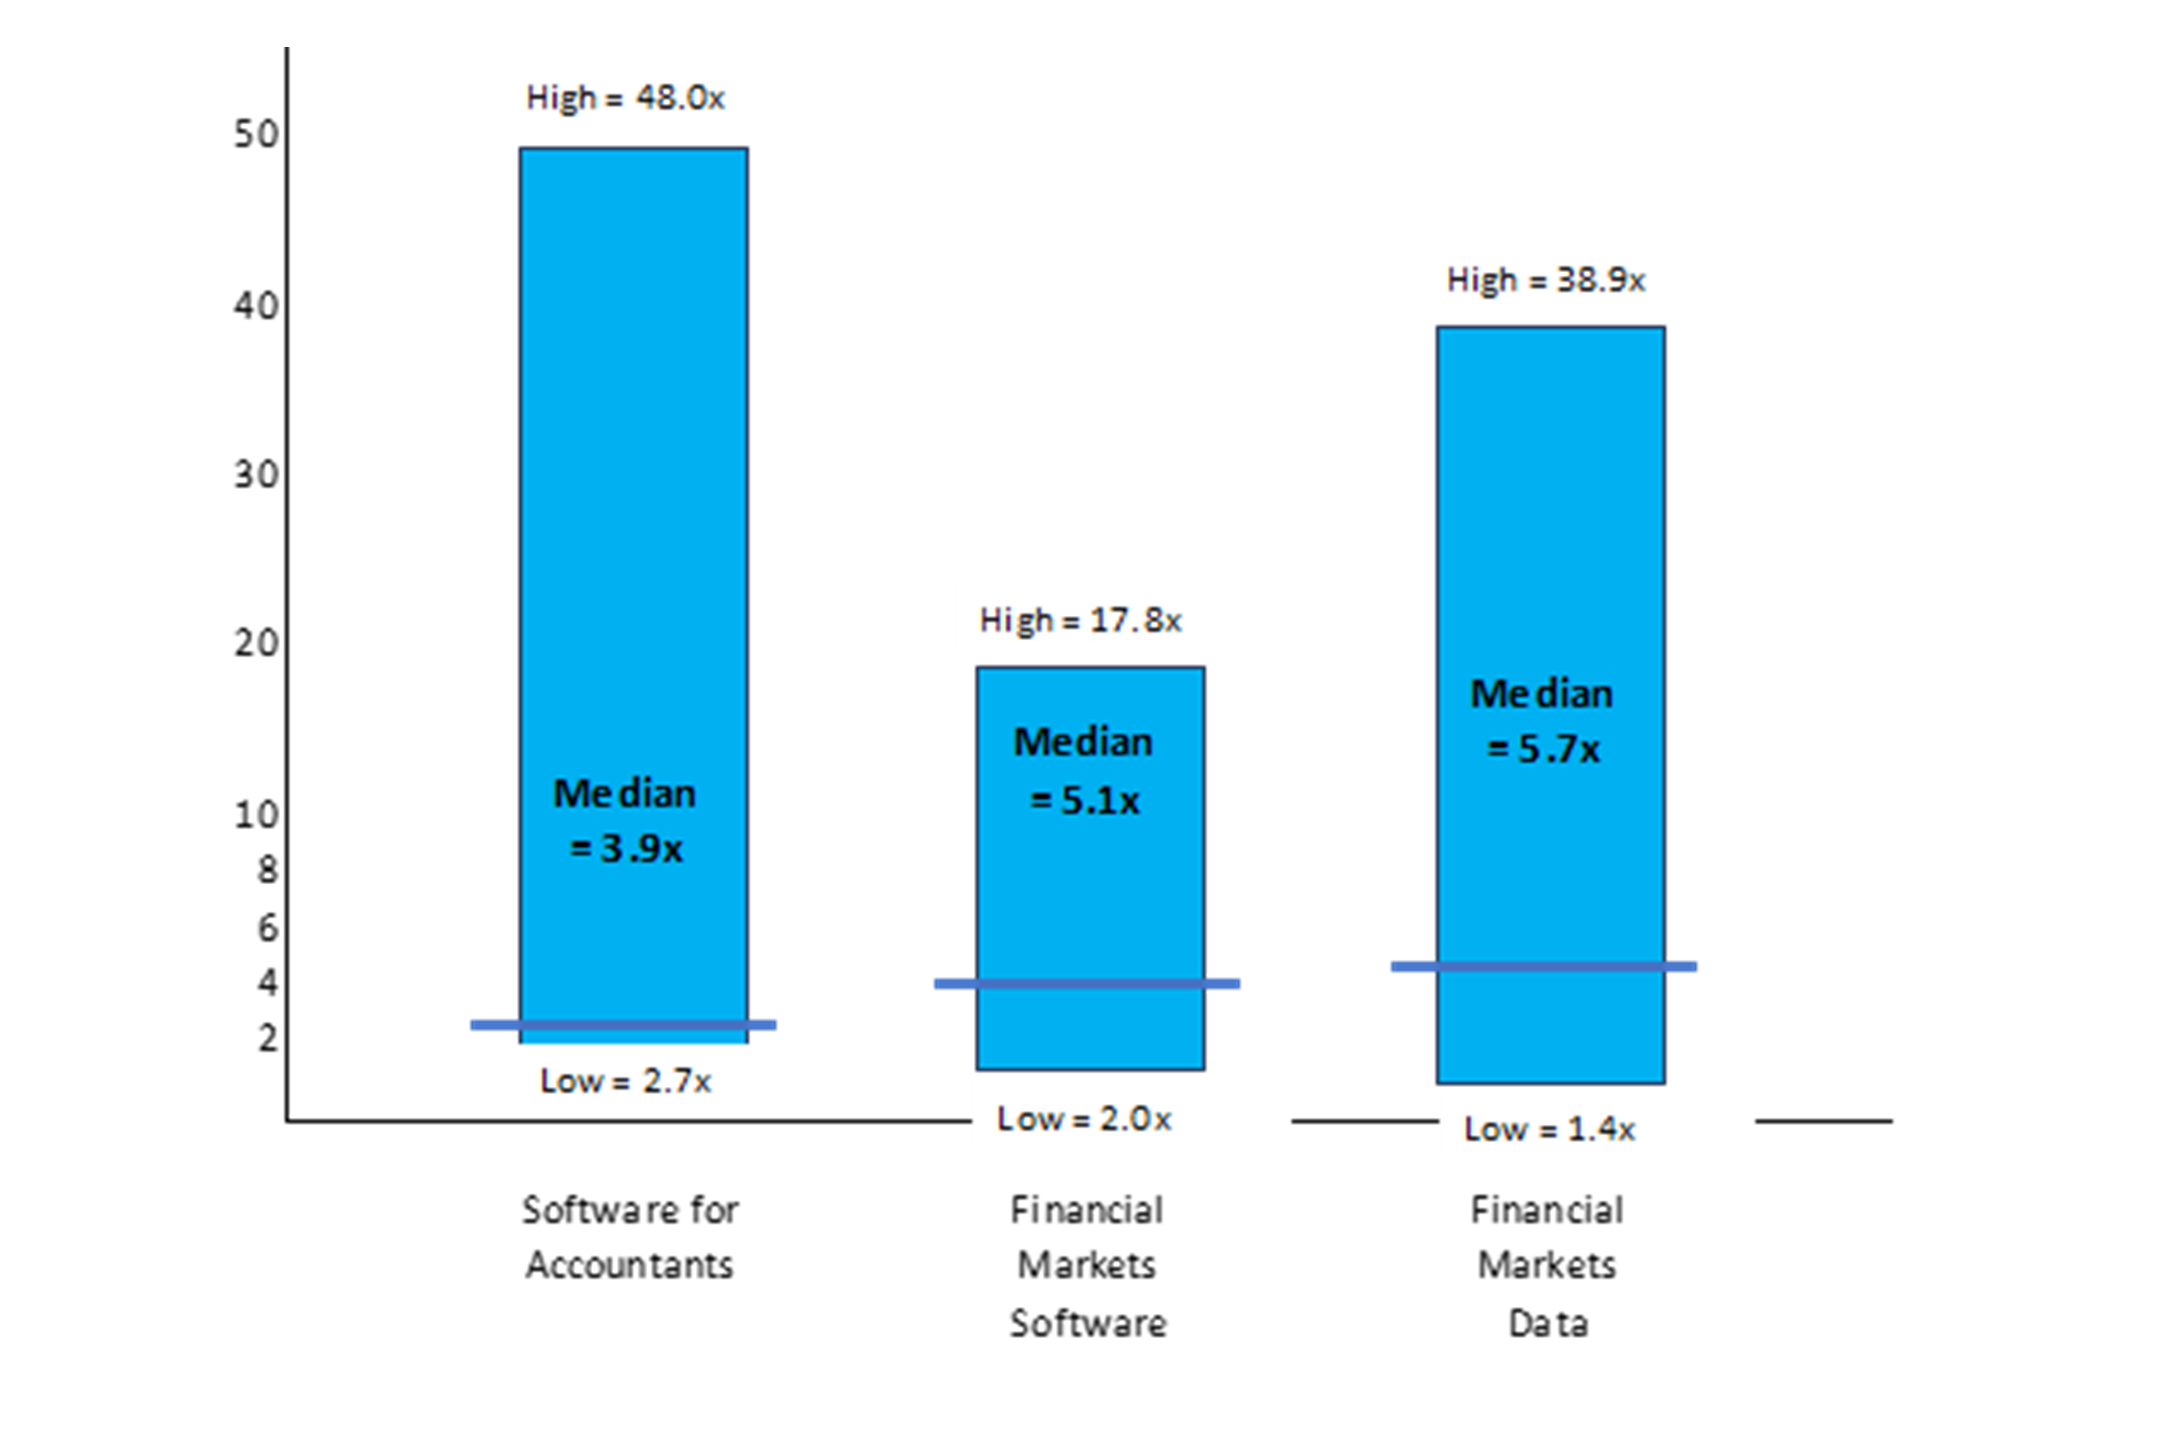 A bar chart showing the Revenue Multiple Range with mediums for: Software for Accountants at 3.9x, Financial Markets Software at 5.1x and Financial Markets Data at 5.7x.